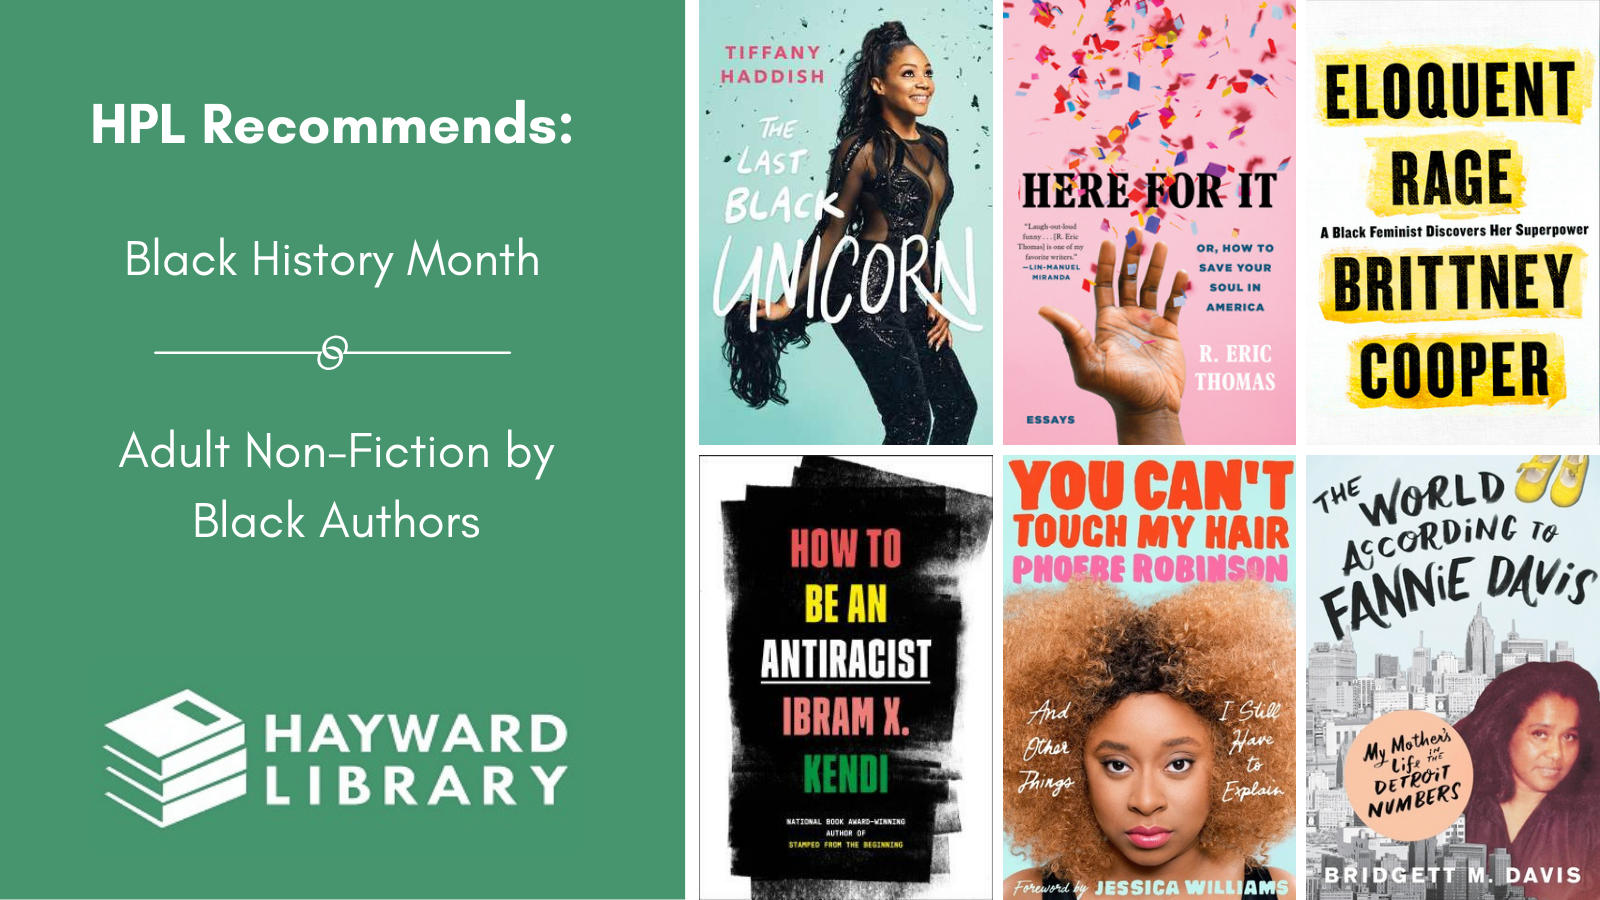 Collage of book covers with a green block on left side that says HPL Recommends, Black History Month, Adult Non-Fiction by Black Authors in white text, with Hayward Library logo below it.